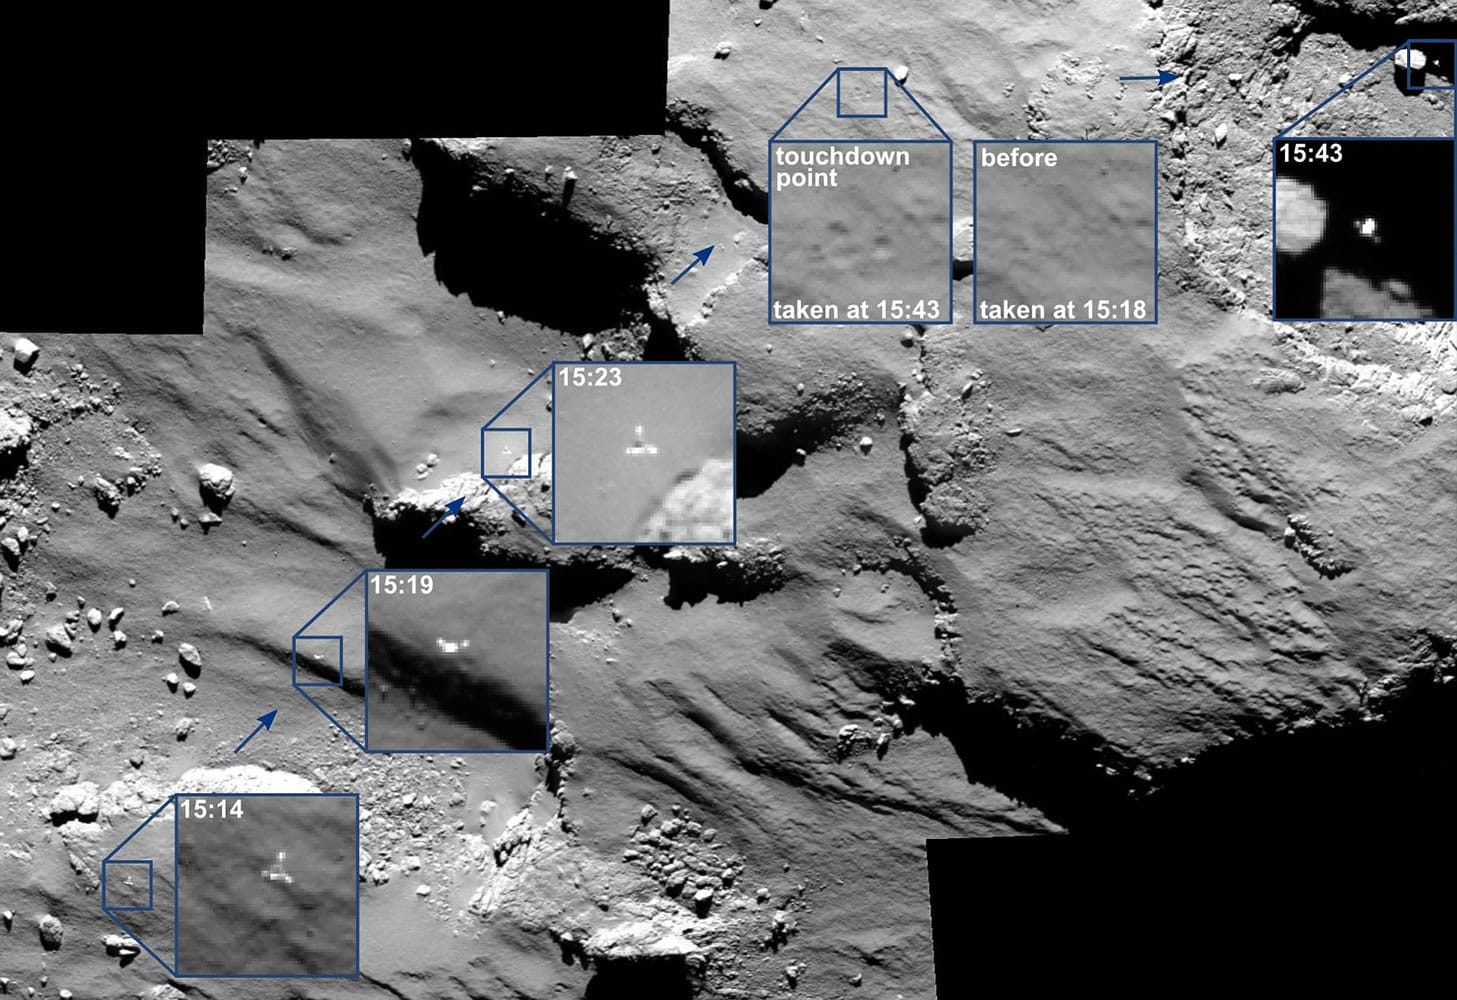 European Space Agency
The combination image of several partially enlarged photographs released Monday by the European Space Agency shows the journey of Rosetta's Philae lander as it approached and then rebounded from its first touchdown on Comet 67P/Churyumov-Gerasimenko on Nov. 12. The series of images was captured by Rosetta?s OSIRIS camera from a distance of 15.5km (9.6 miles) from the comet surface over a 30 minute period spanning the first touchdown. The time of each of image has marked been marked by source on the corresponding insets and is in GMT. A comparison of the touchdown area shortly before and after first contact with the surface is also provided. From left to right, the images show Philae descending towards and across the comet before touchdown.  (AP Photo/European Space Agency)